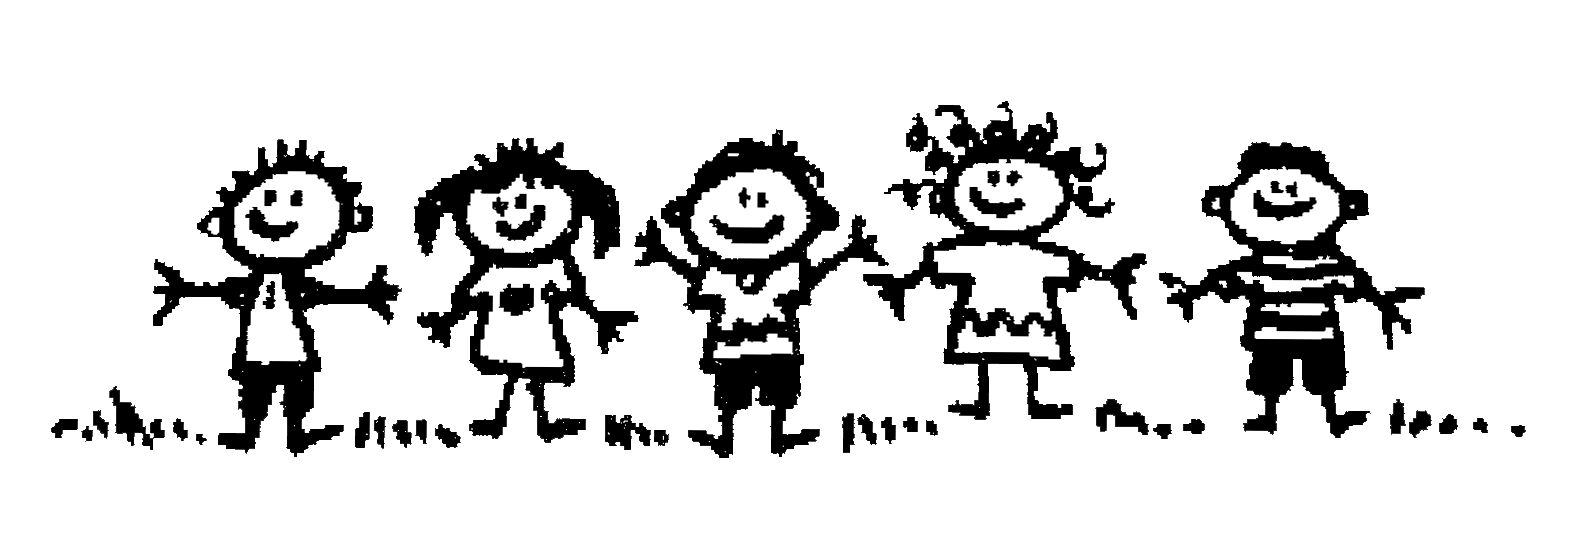 Church Day Care Pictures Clipart 